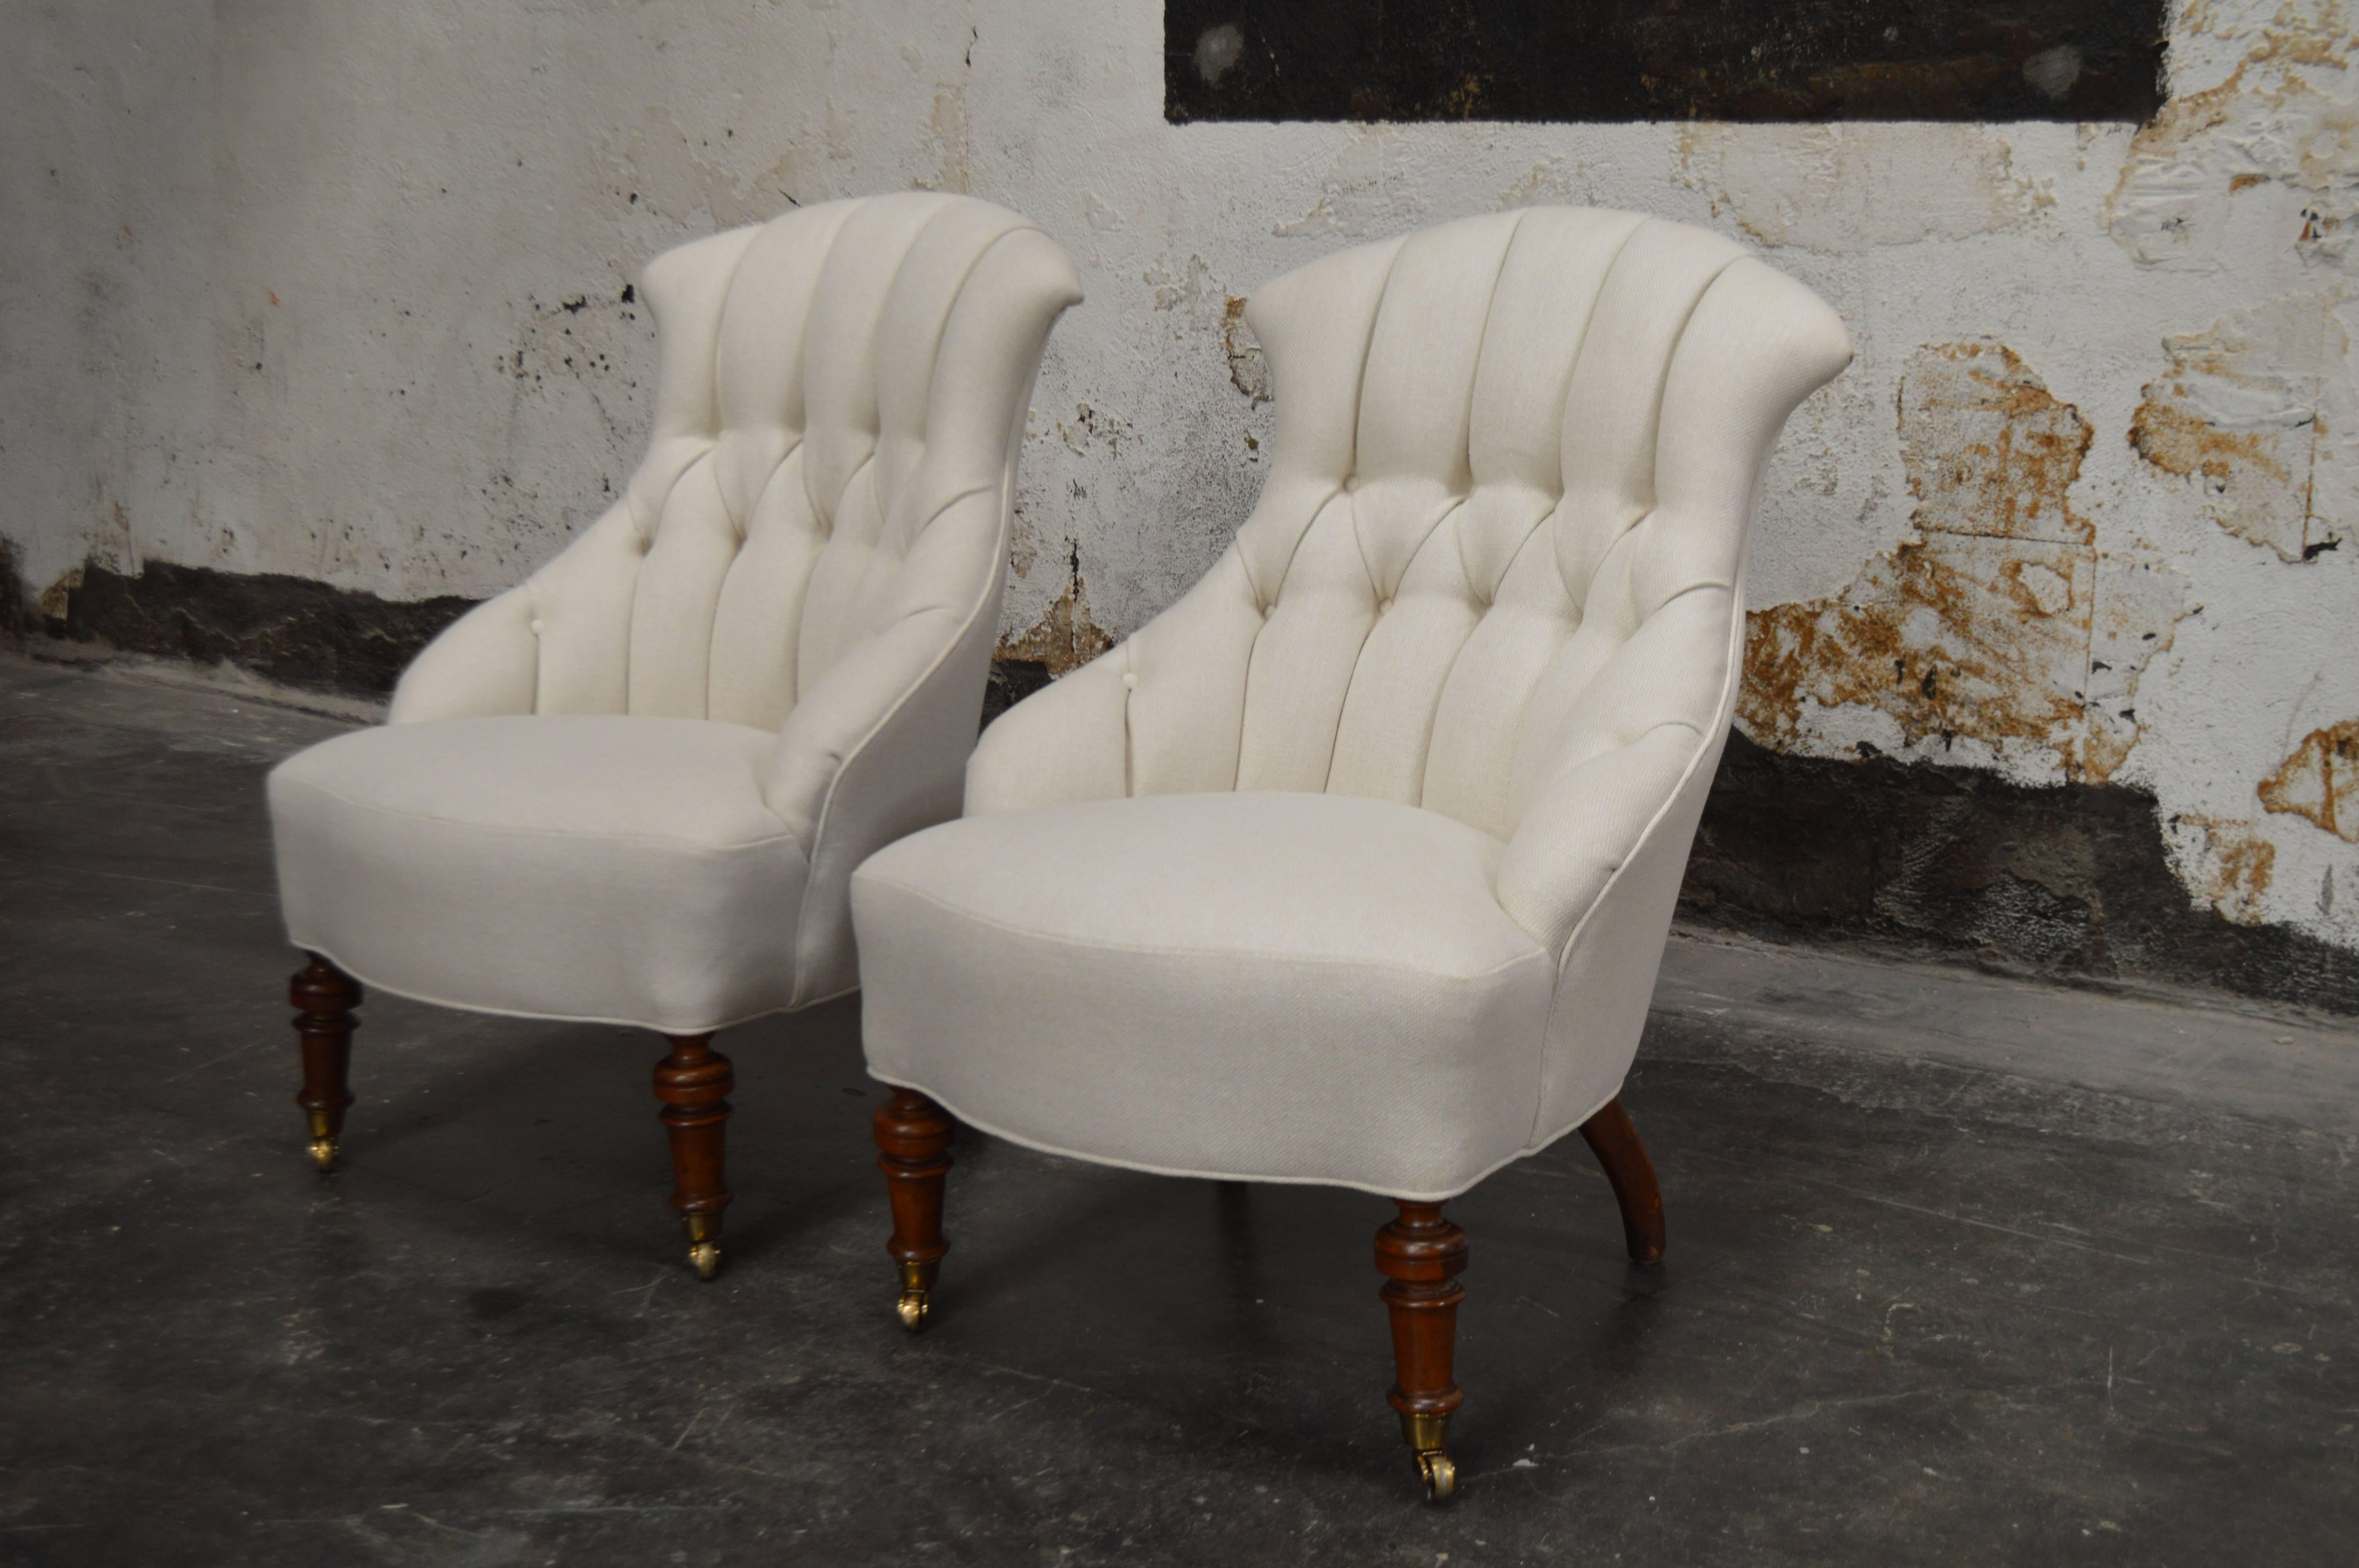 Pair of curvaceous vintage Swedish 